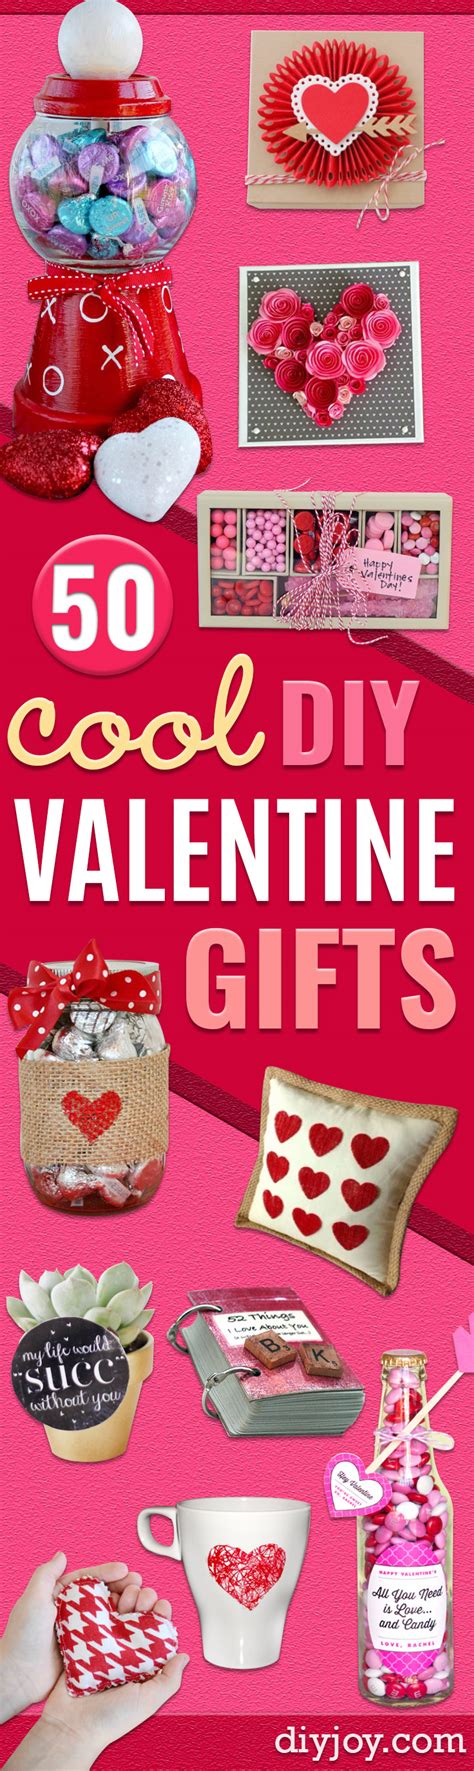 Handmade gift ideas to make for valentines day for husband, boyfriend, dad an other special guys. 50 Easy DIY Valentine's Day Gifts